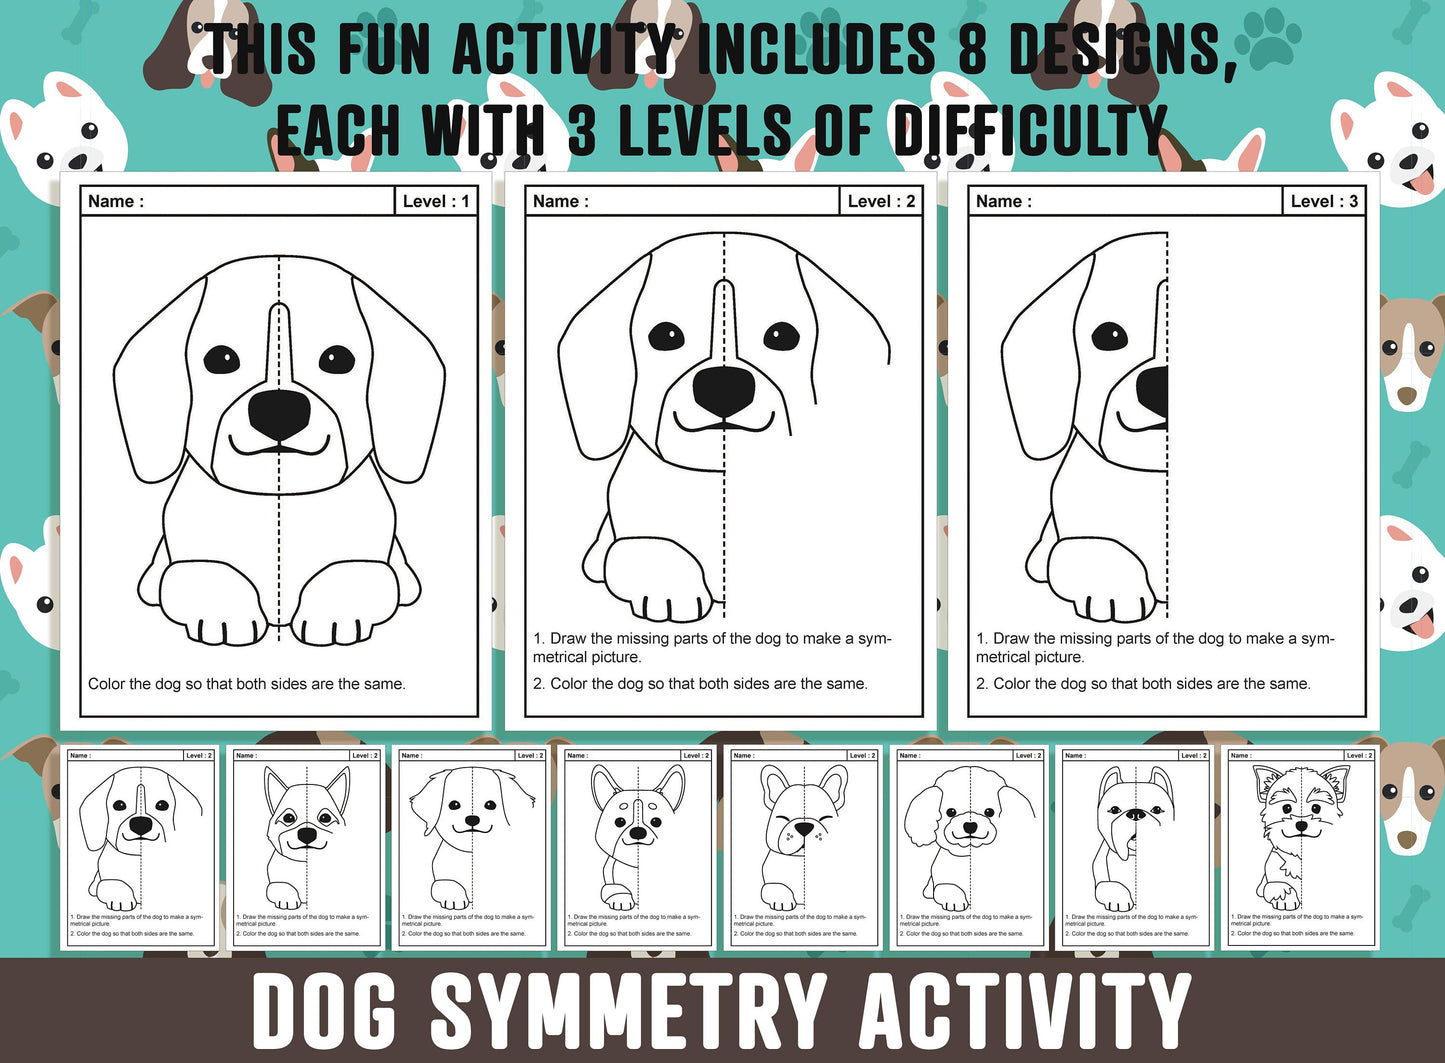 Dog Symmetry Worksheet, Puppy Theme Lines of Symmetry Activity, 24 Pages, Includes 8 Designs, Each With 3 Levels of Difficulty, Art & Math